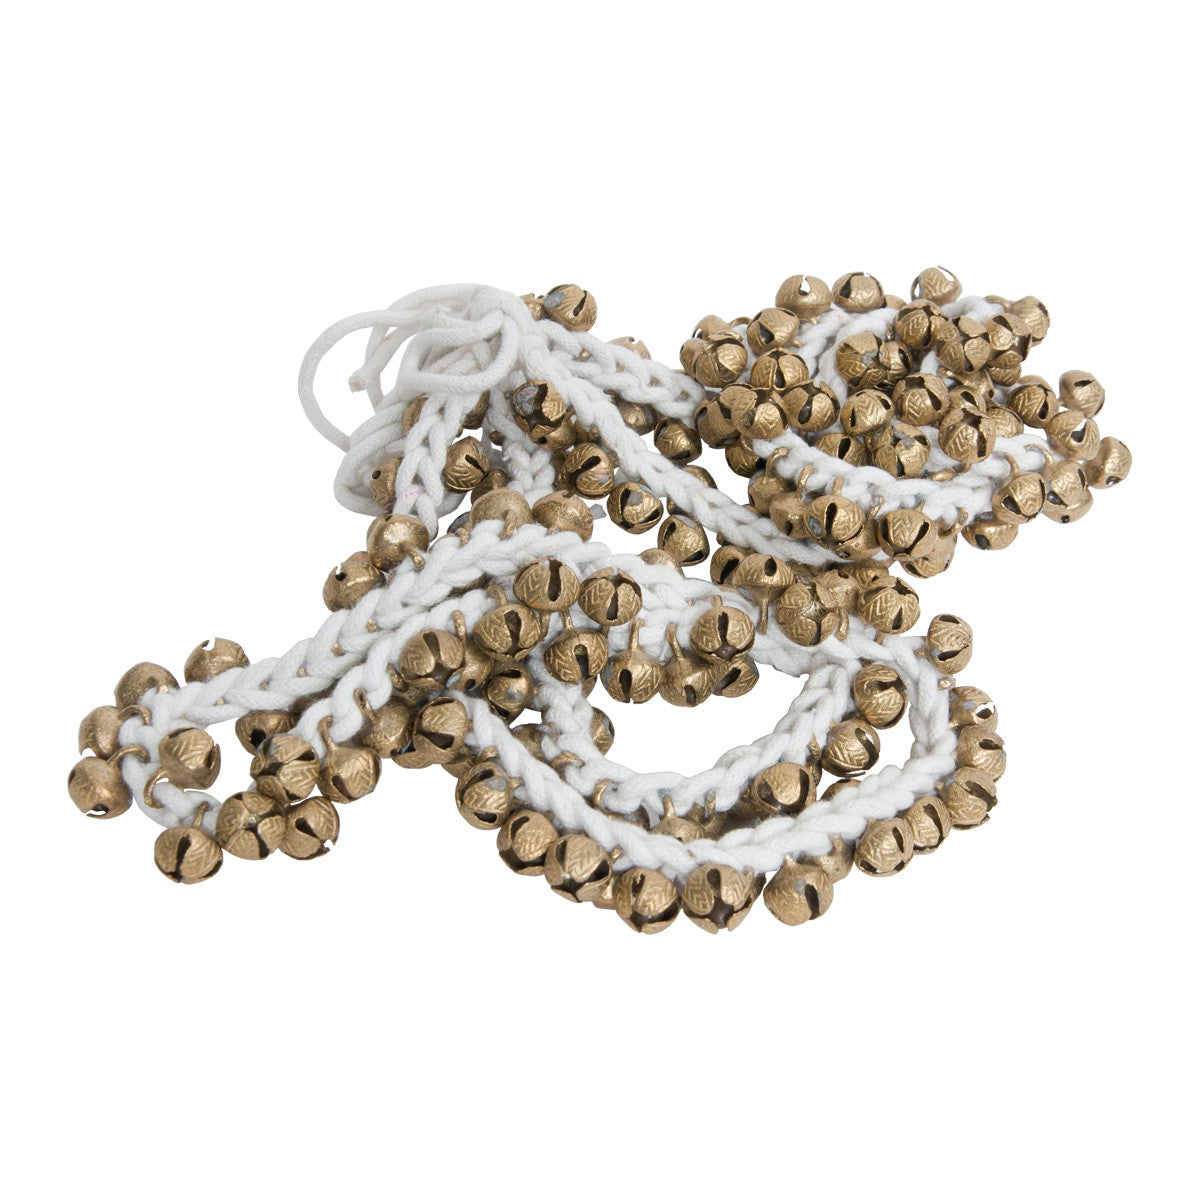 MID-EAST STRING OF 100 ROUND ANKLE BELLS - PAIR